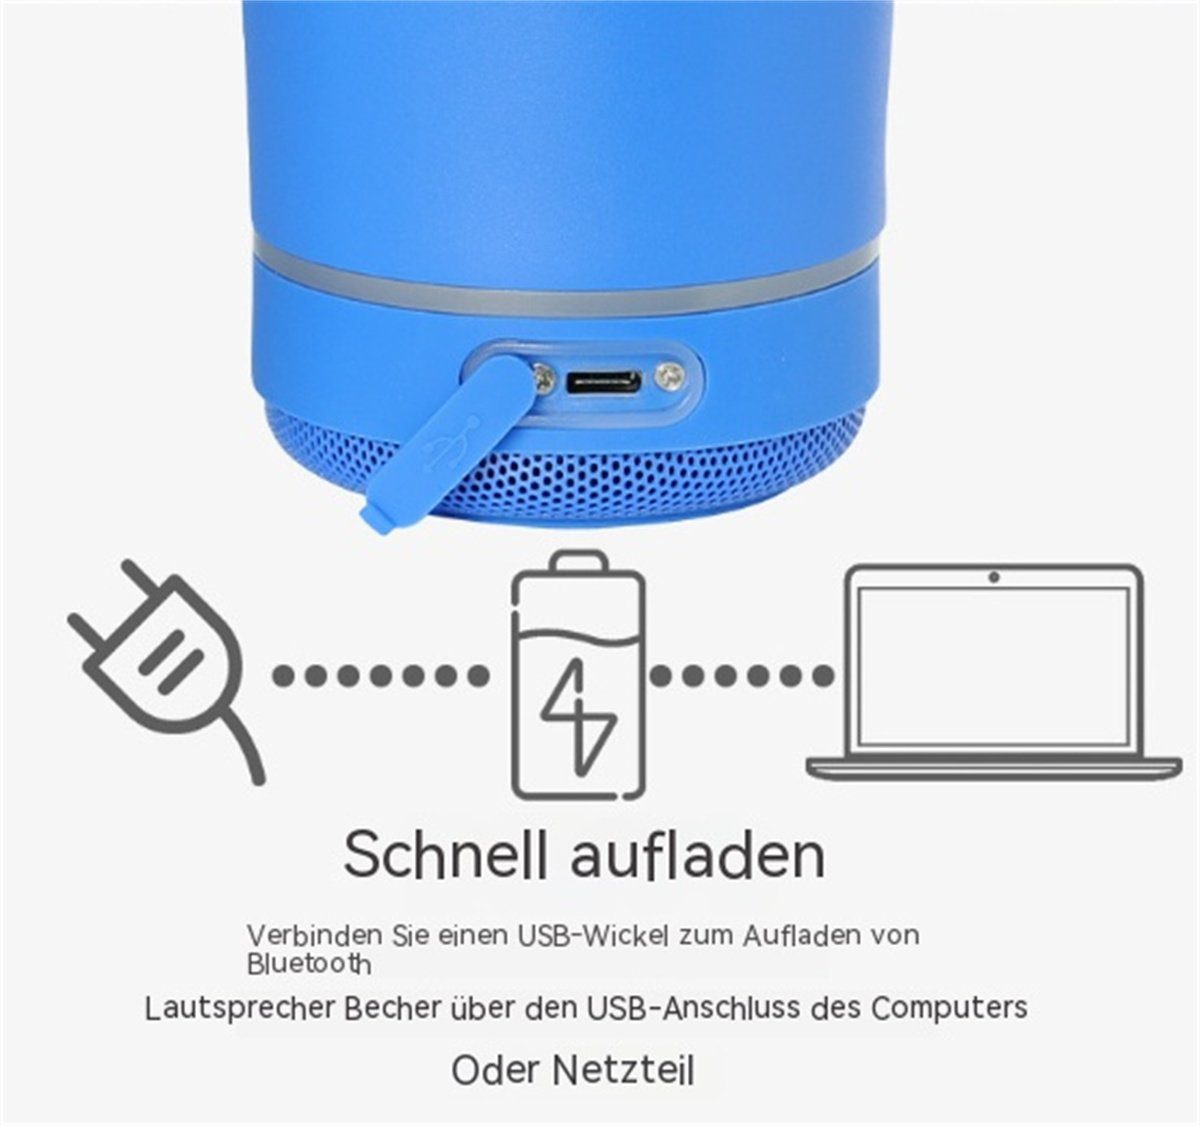 Tragbare selected carefully Bluetooth-Lautsprecher Blau Wasserbecher-Bluetooth-Lautsprecher-All-in-One-Maschine